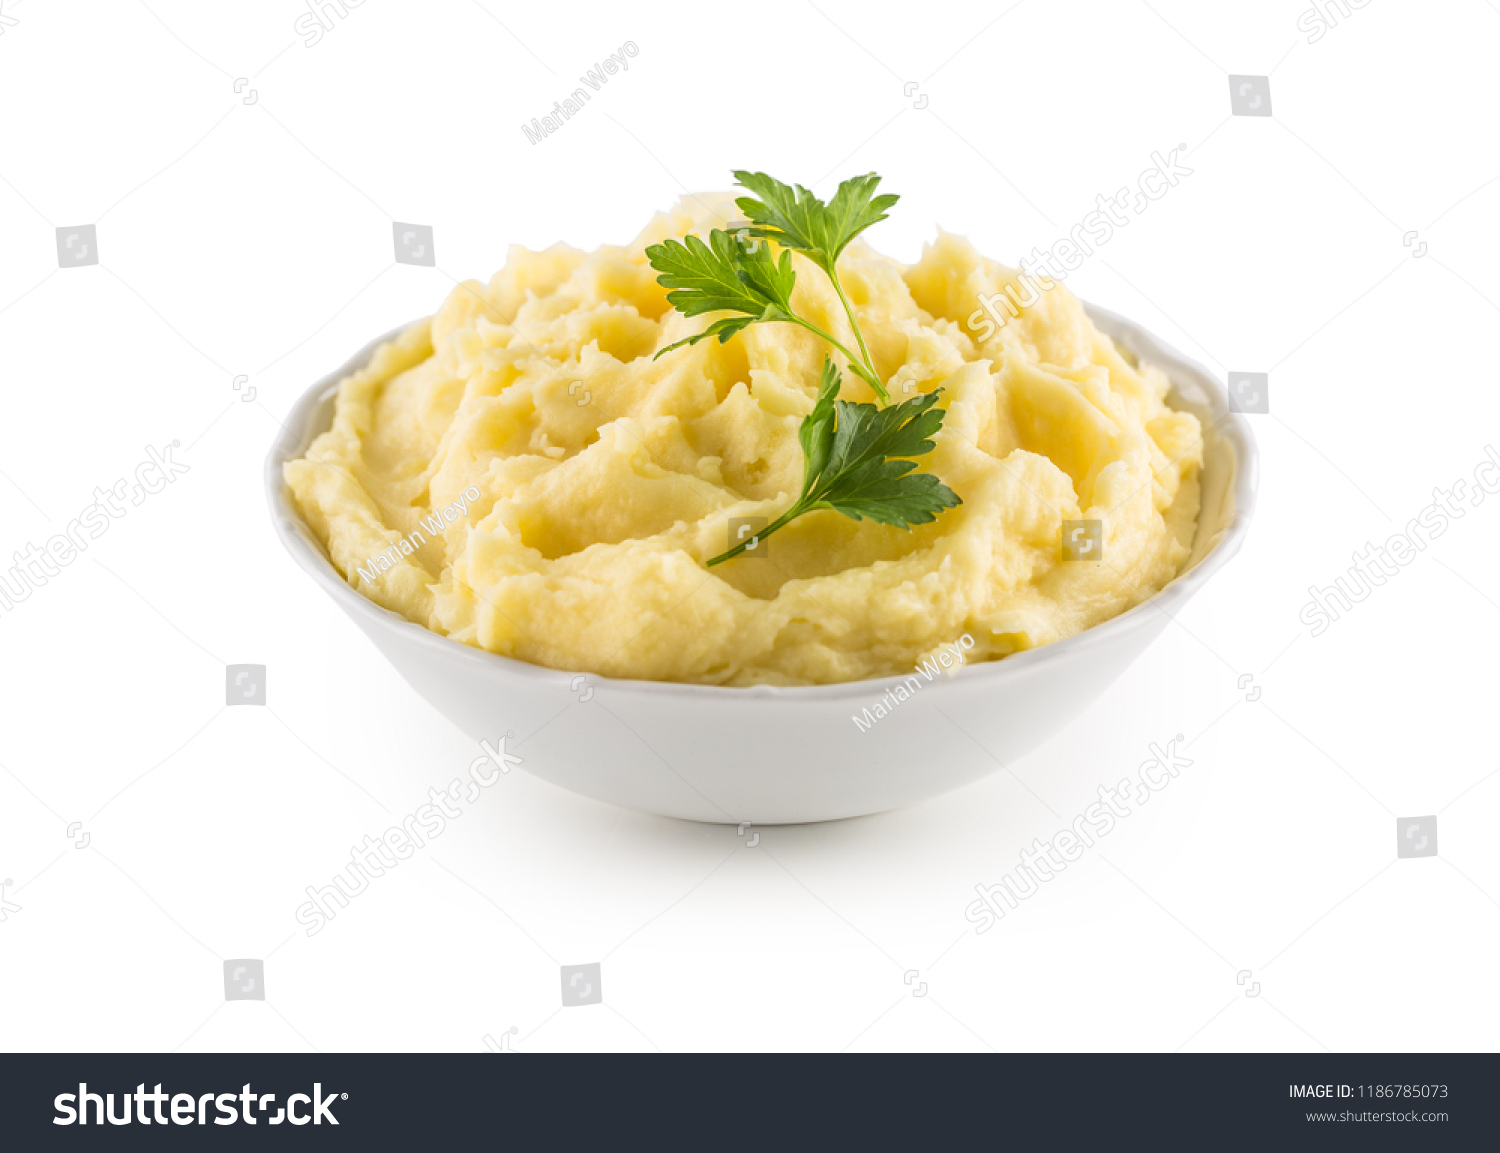 Mashed potatoes in bowl isolated on white background. #1186785073